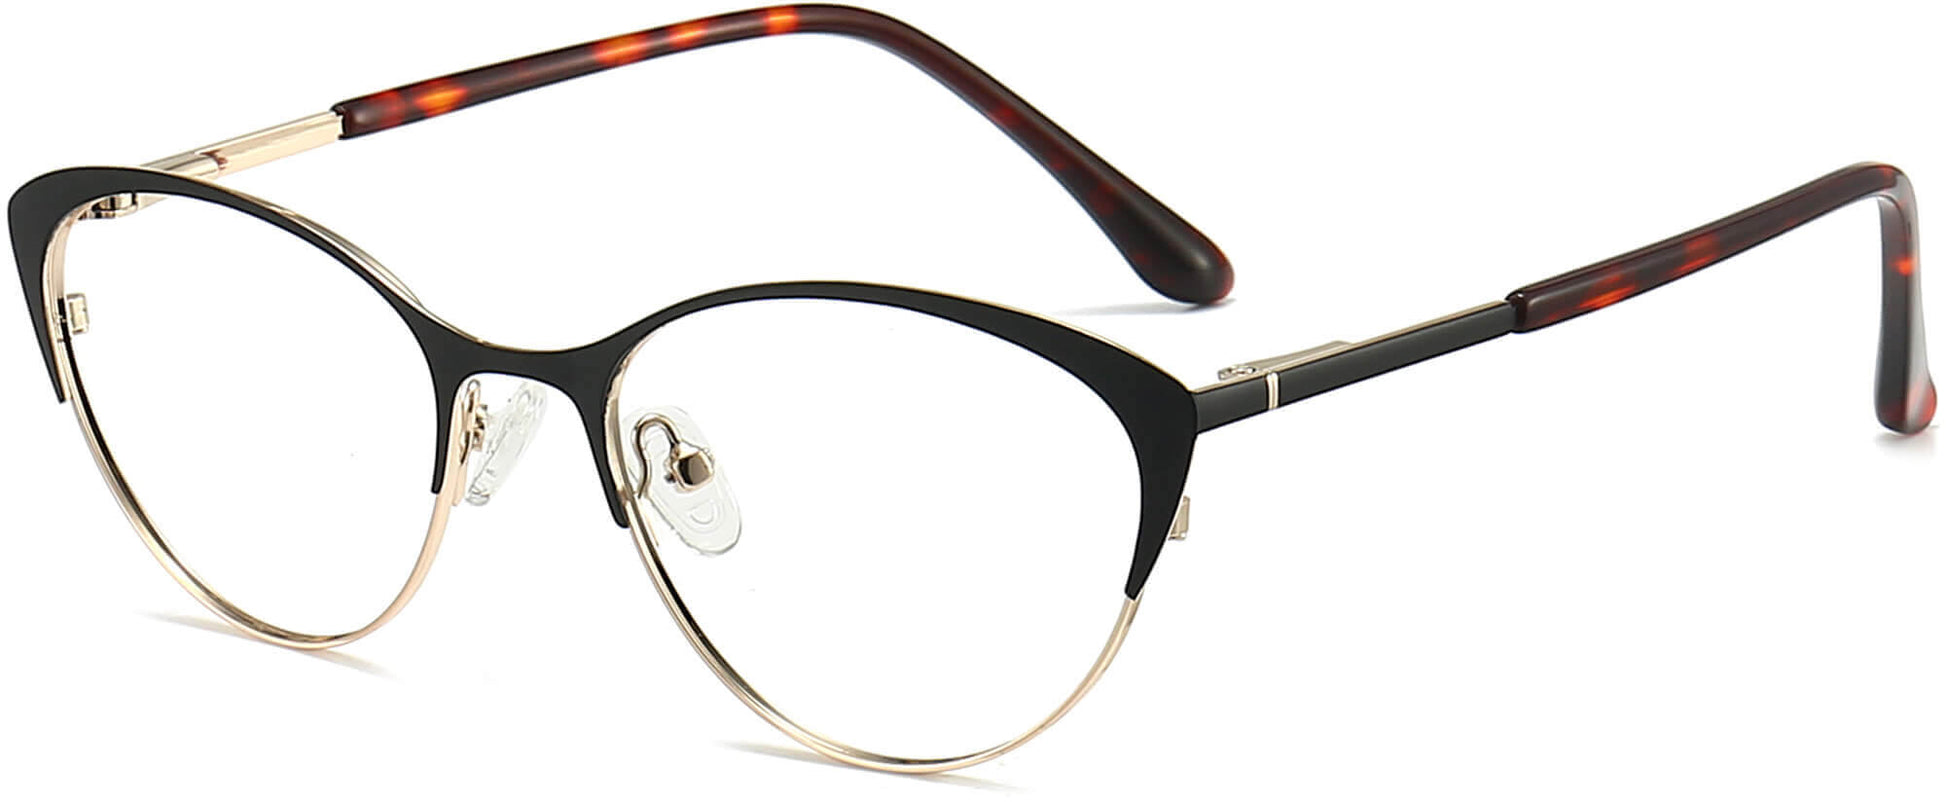 Maia Cateye Black Eyeglasses from ANRRI, angle view